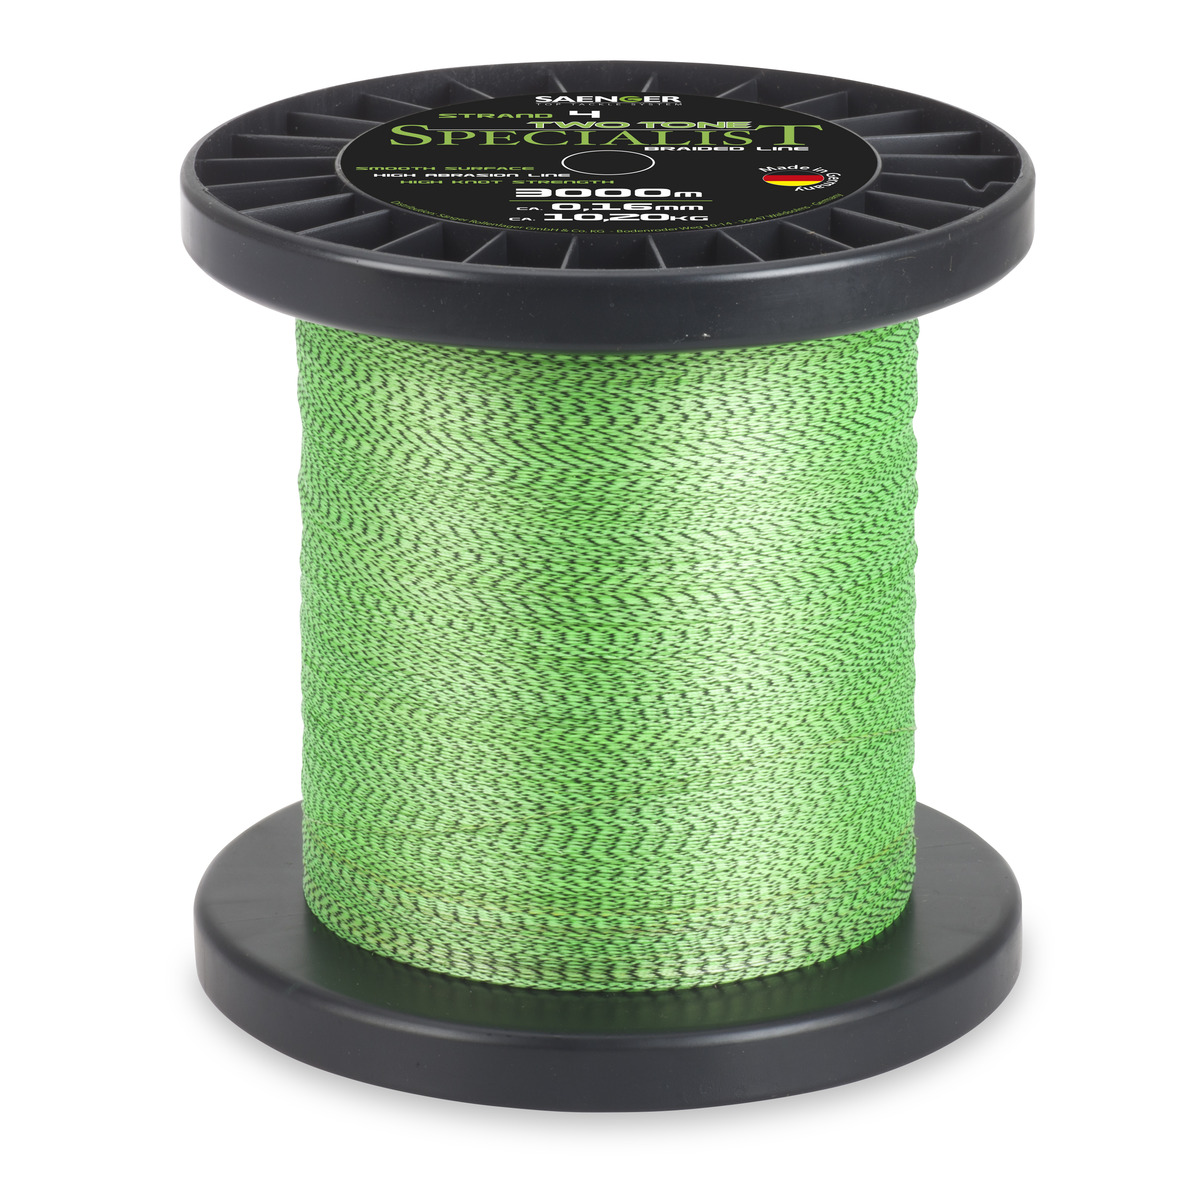 Saenger Specialist Two Tone Fluo Braid - 0,30 mm - 25,4 kg 3000 m